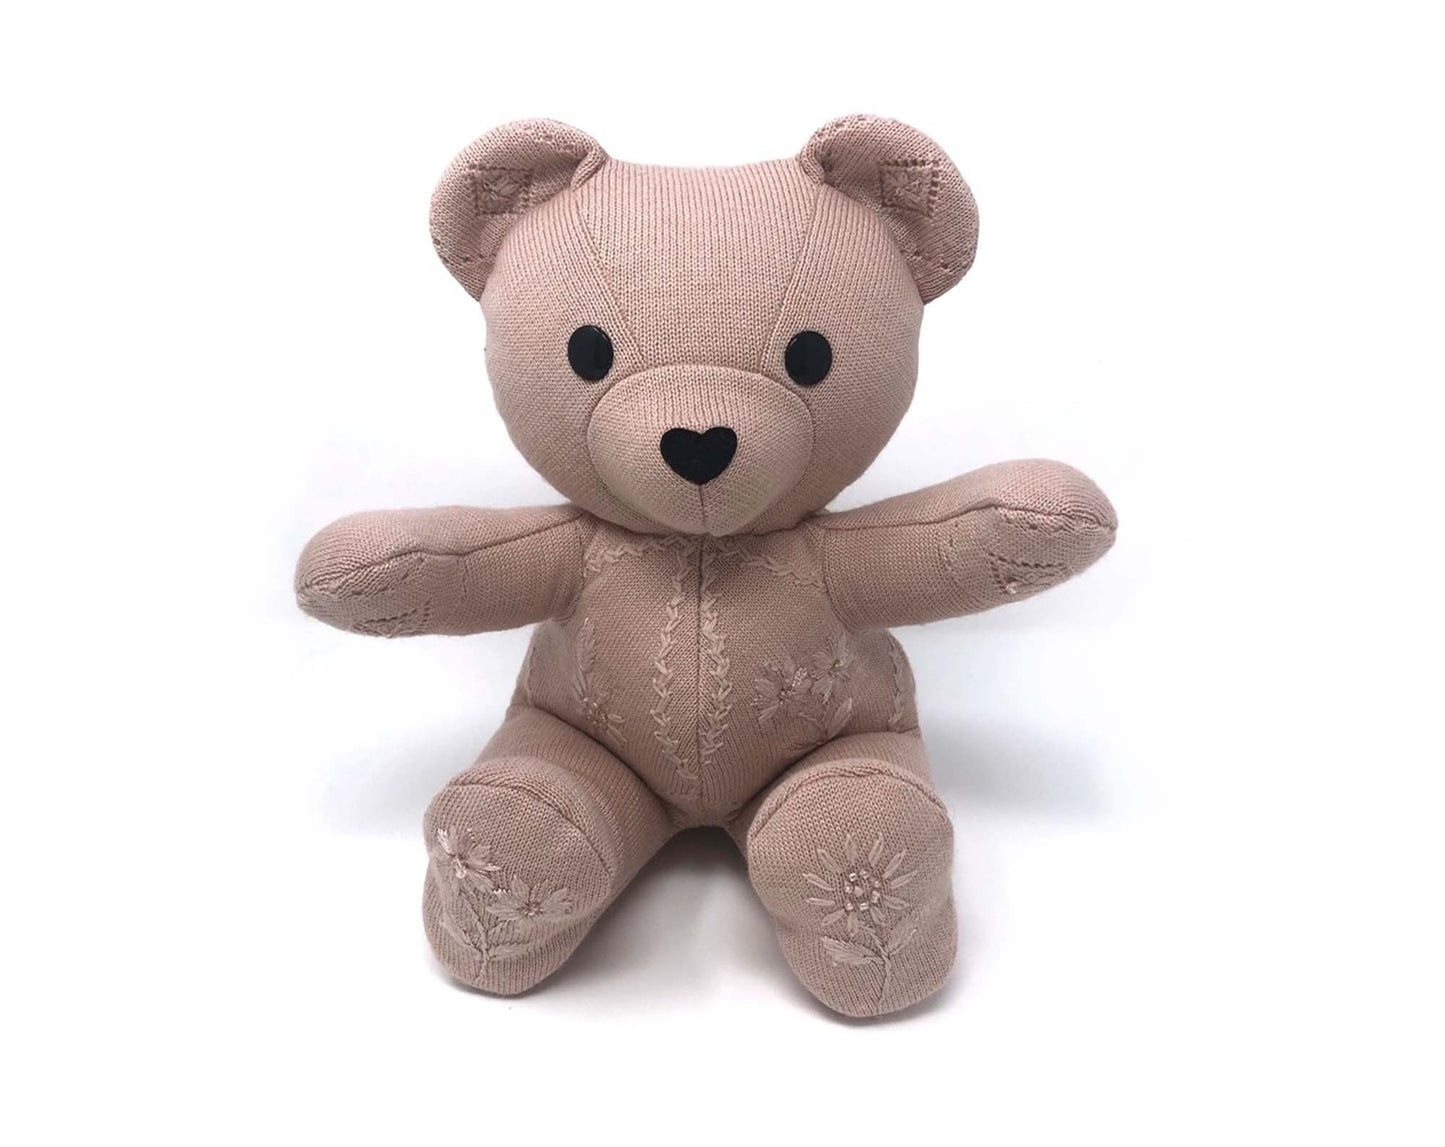 DIGITAL Memory Bear Teddy Sewing Patterns 8.5” and 11” - INSTANT DOWNLOAD